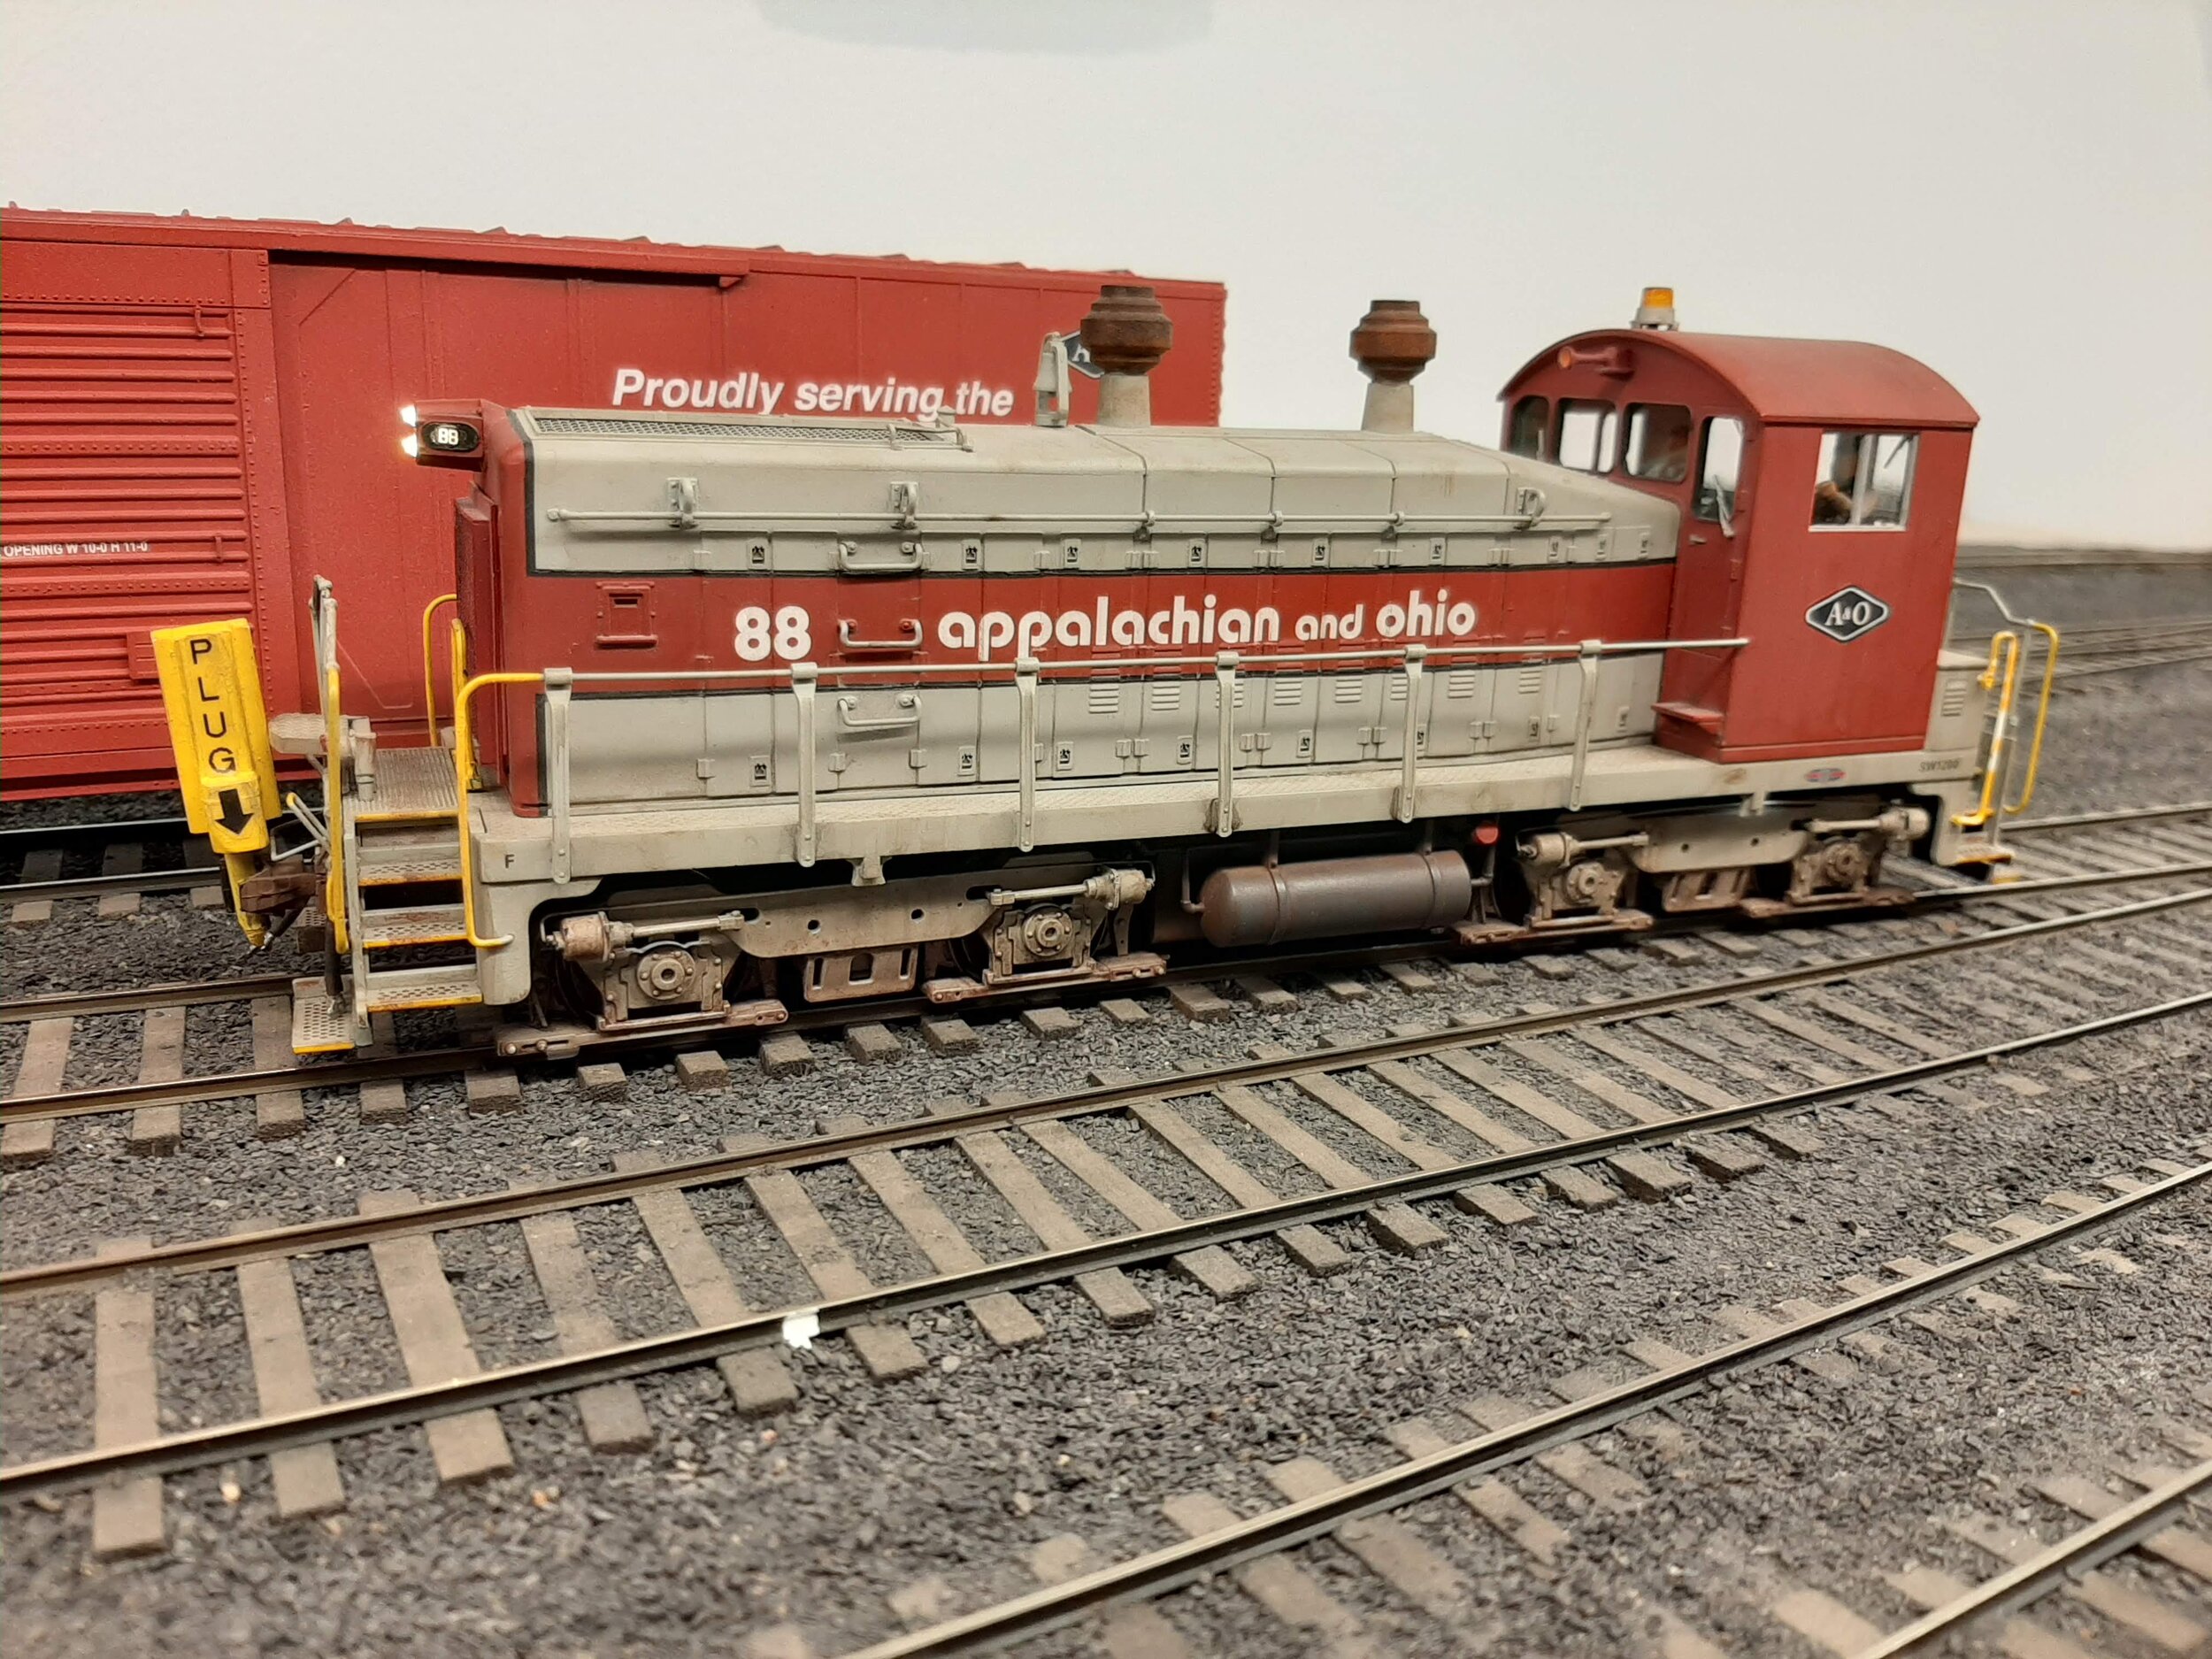  coupler plugs, which keep the coupler from opening. With knuckle held closed the engine can “trim” the class yard. That is- push all the cars into bowl of hump yard as far as they will go, leaving room for more cars to be classified. This is a very 